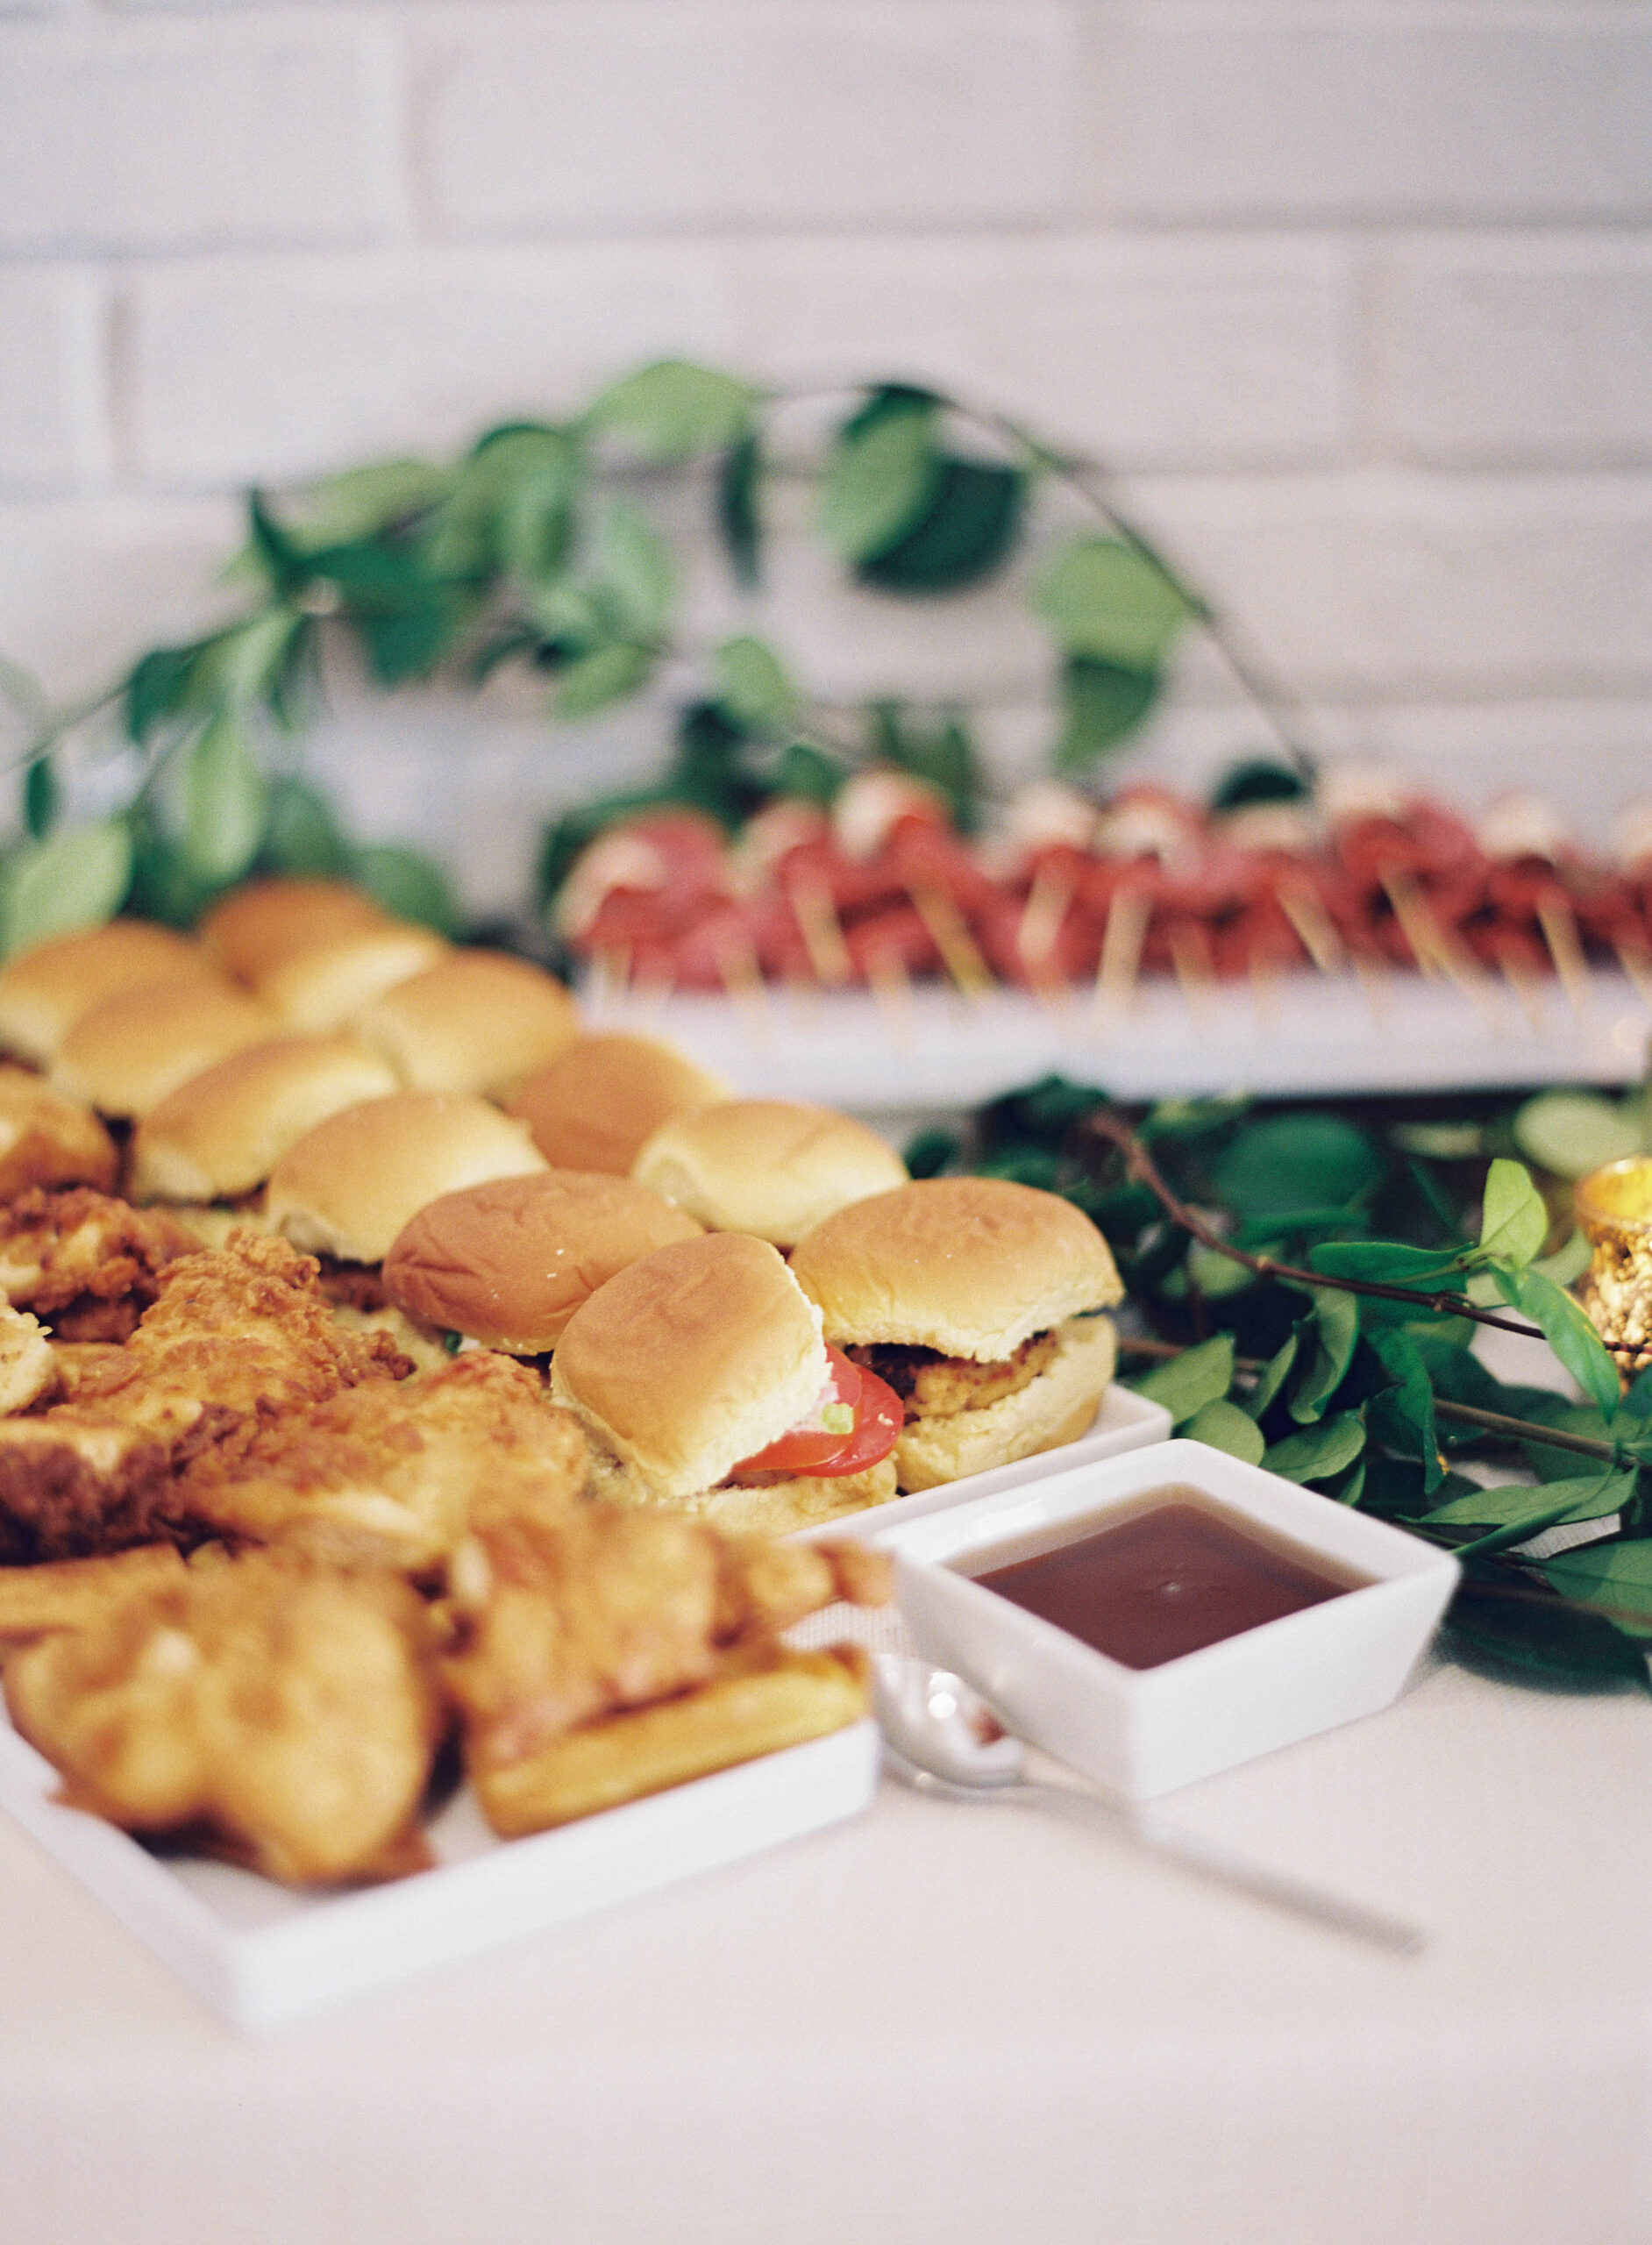 Wedding-station-with-sliders-and-chicken